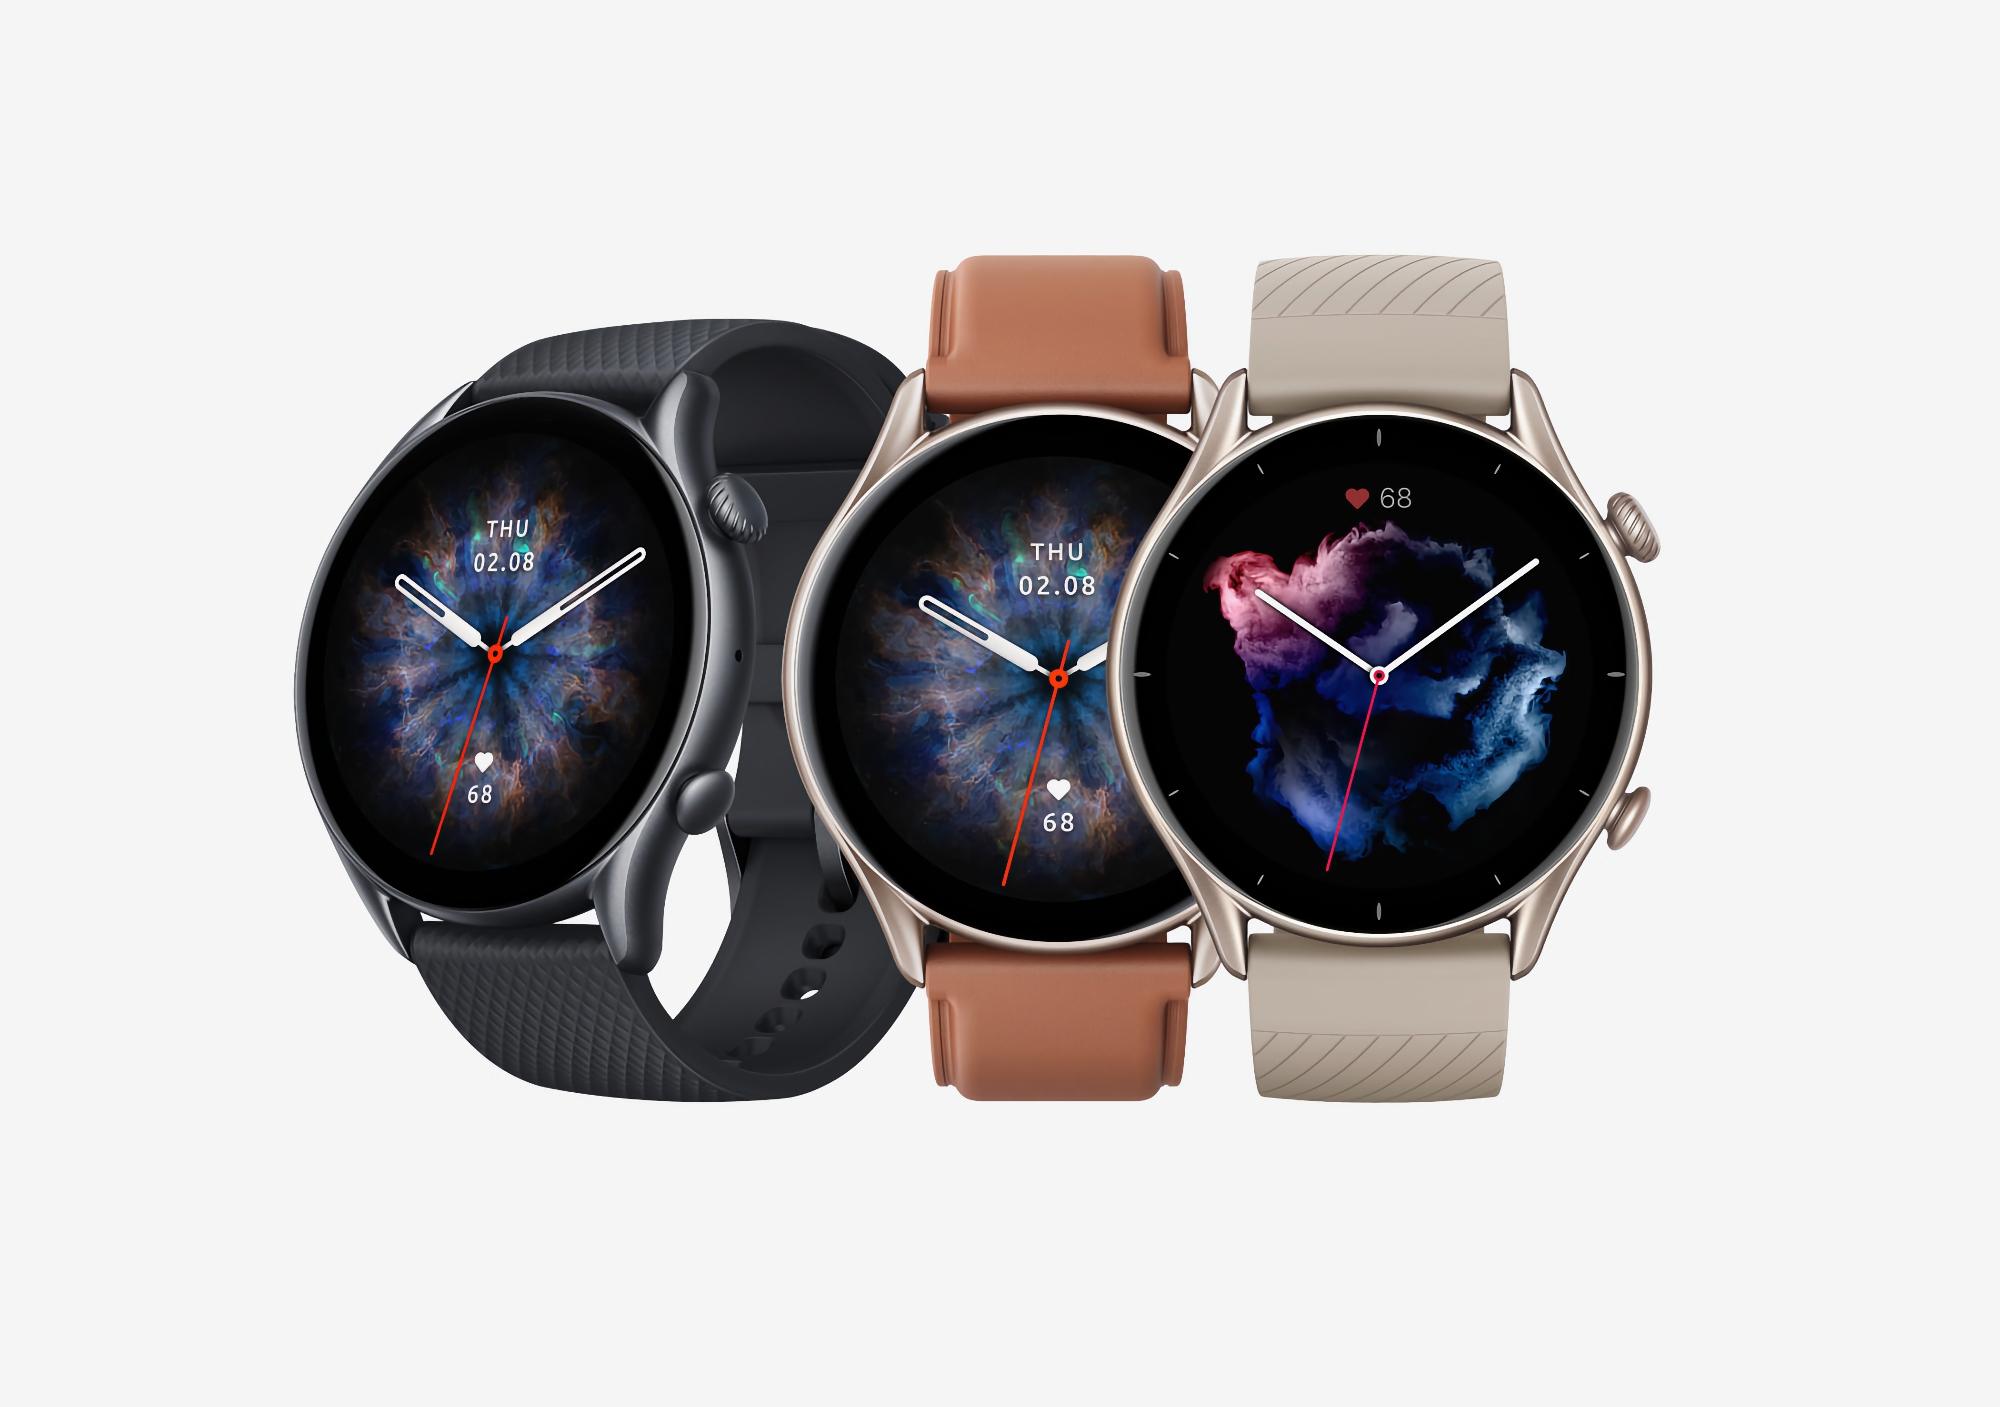 35%: Amazfit GTR 3 Pro smartwatch with AMOLED screen, Alexa support and up  to 12 days of battery life is available at  for a discount